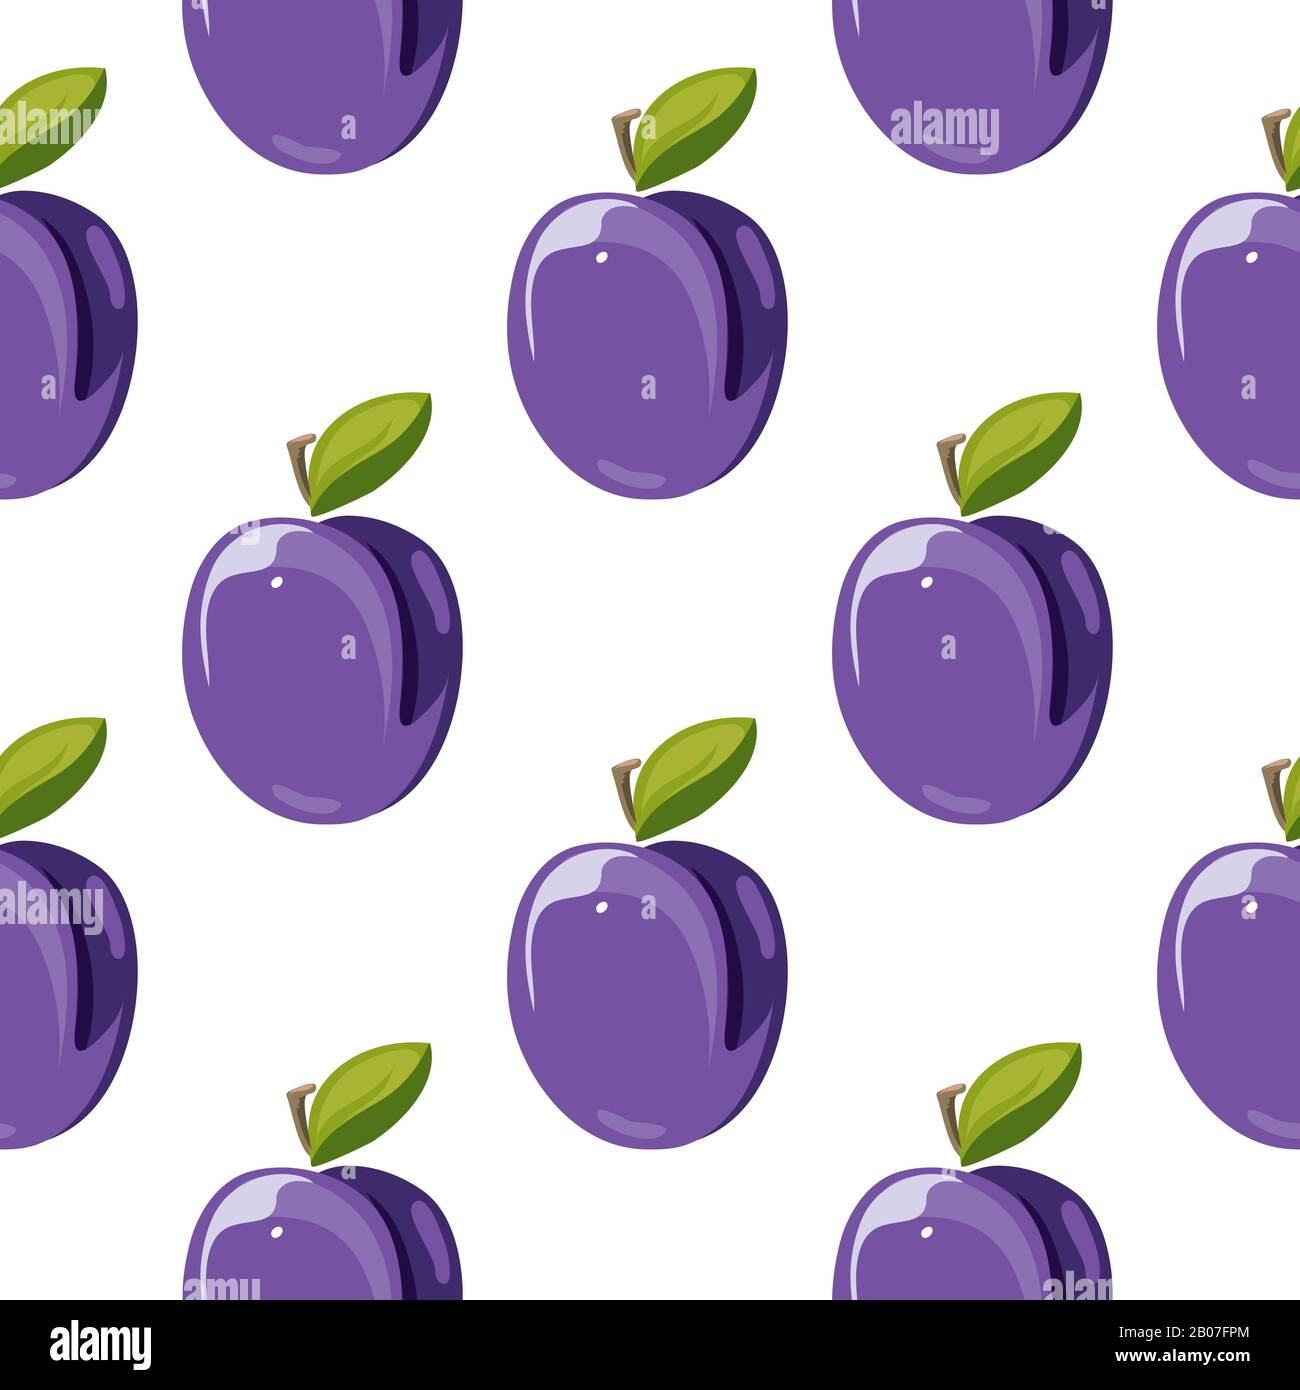 Blue plum fruits with green leaves vector seamless pattern illustration Stock Vector